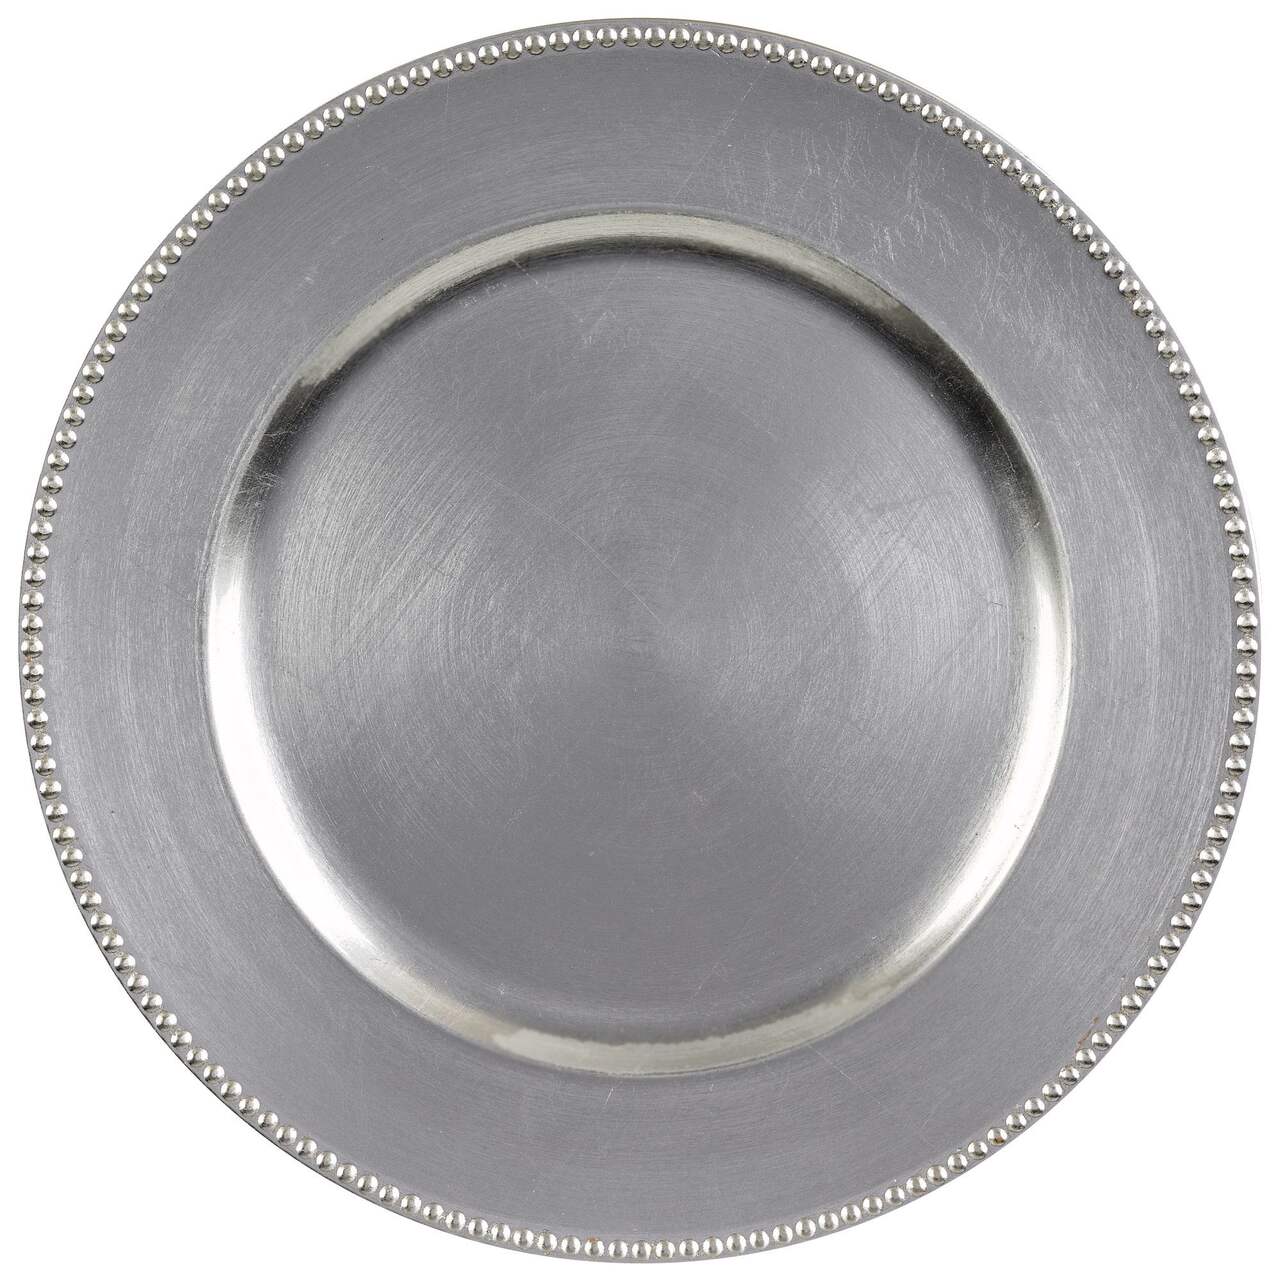 6 CLEAR SILVER 12 Round Beaded Rim Charger Plates Wedding Events Light Gray